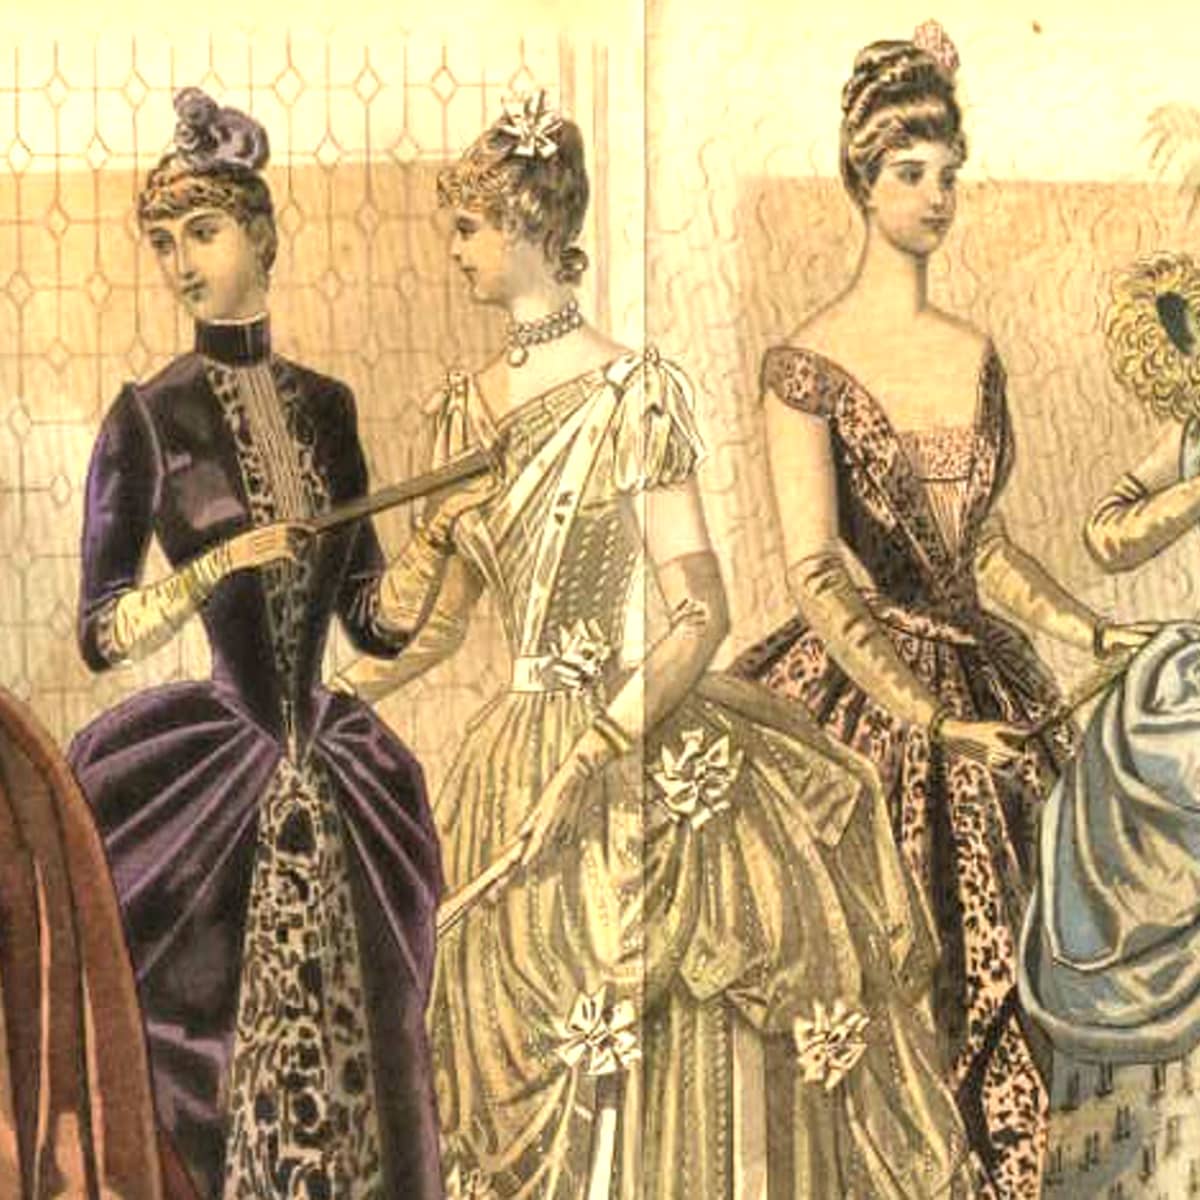 Victorian Era Women's Fashions: From Hoop Skirts to Bustles